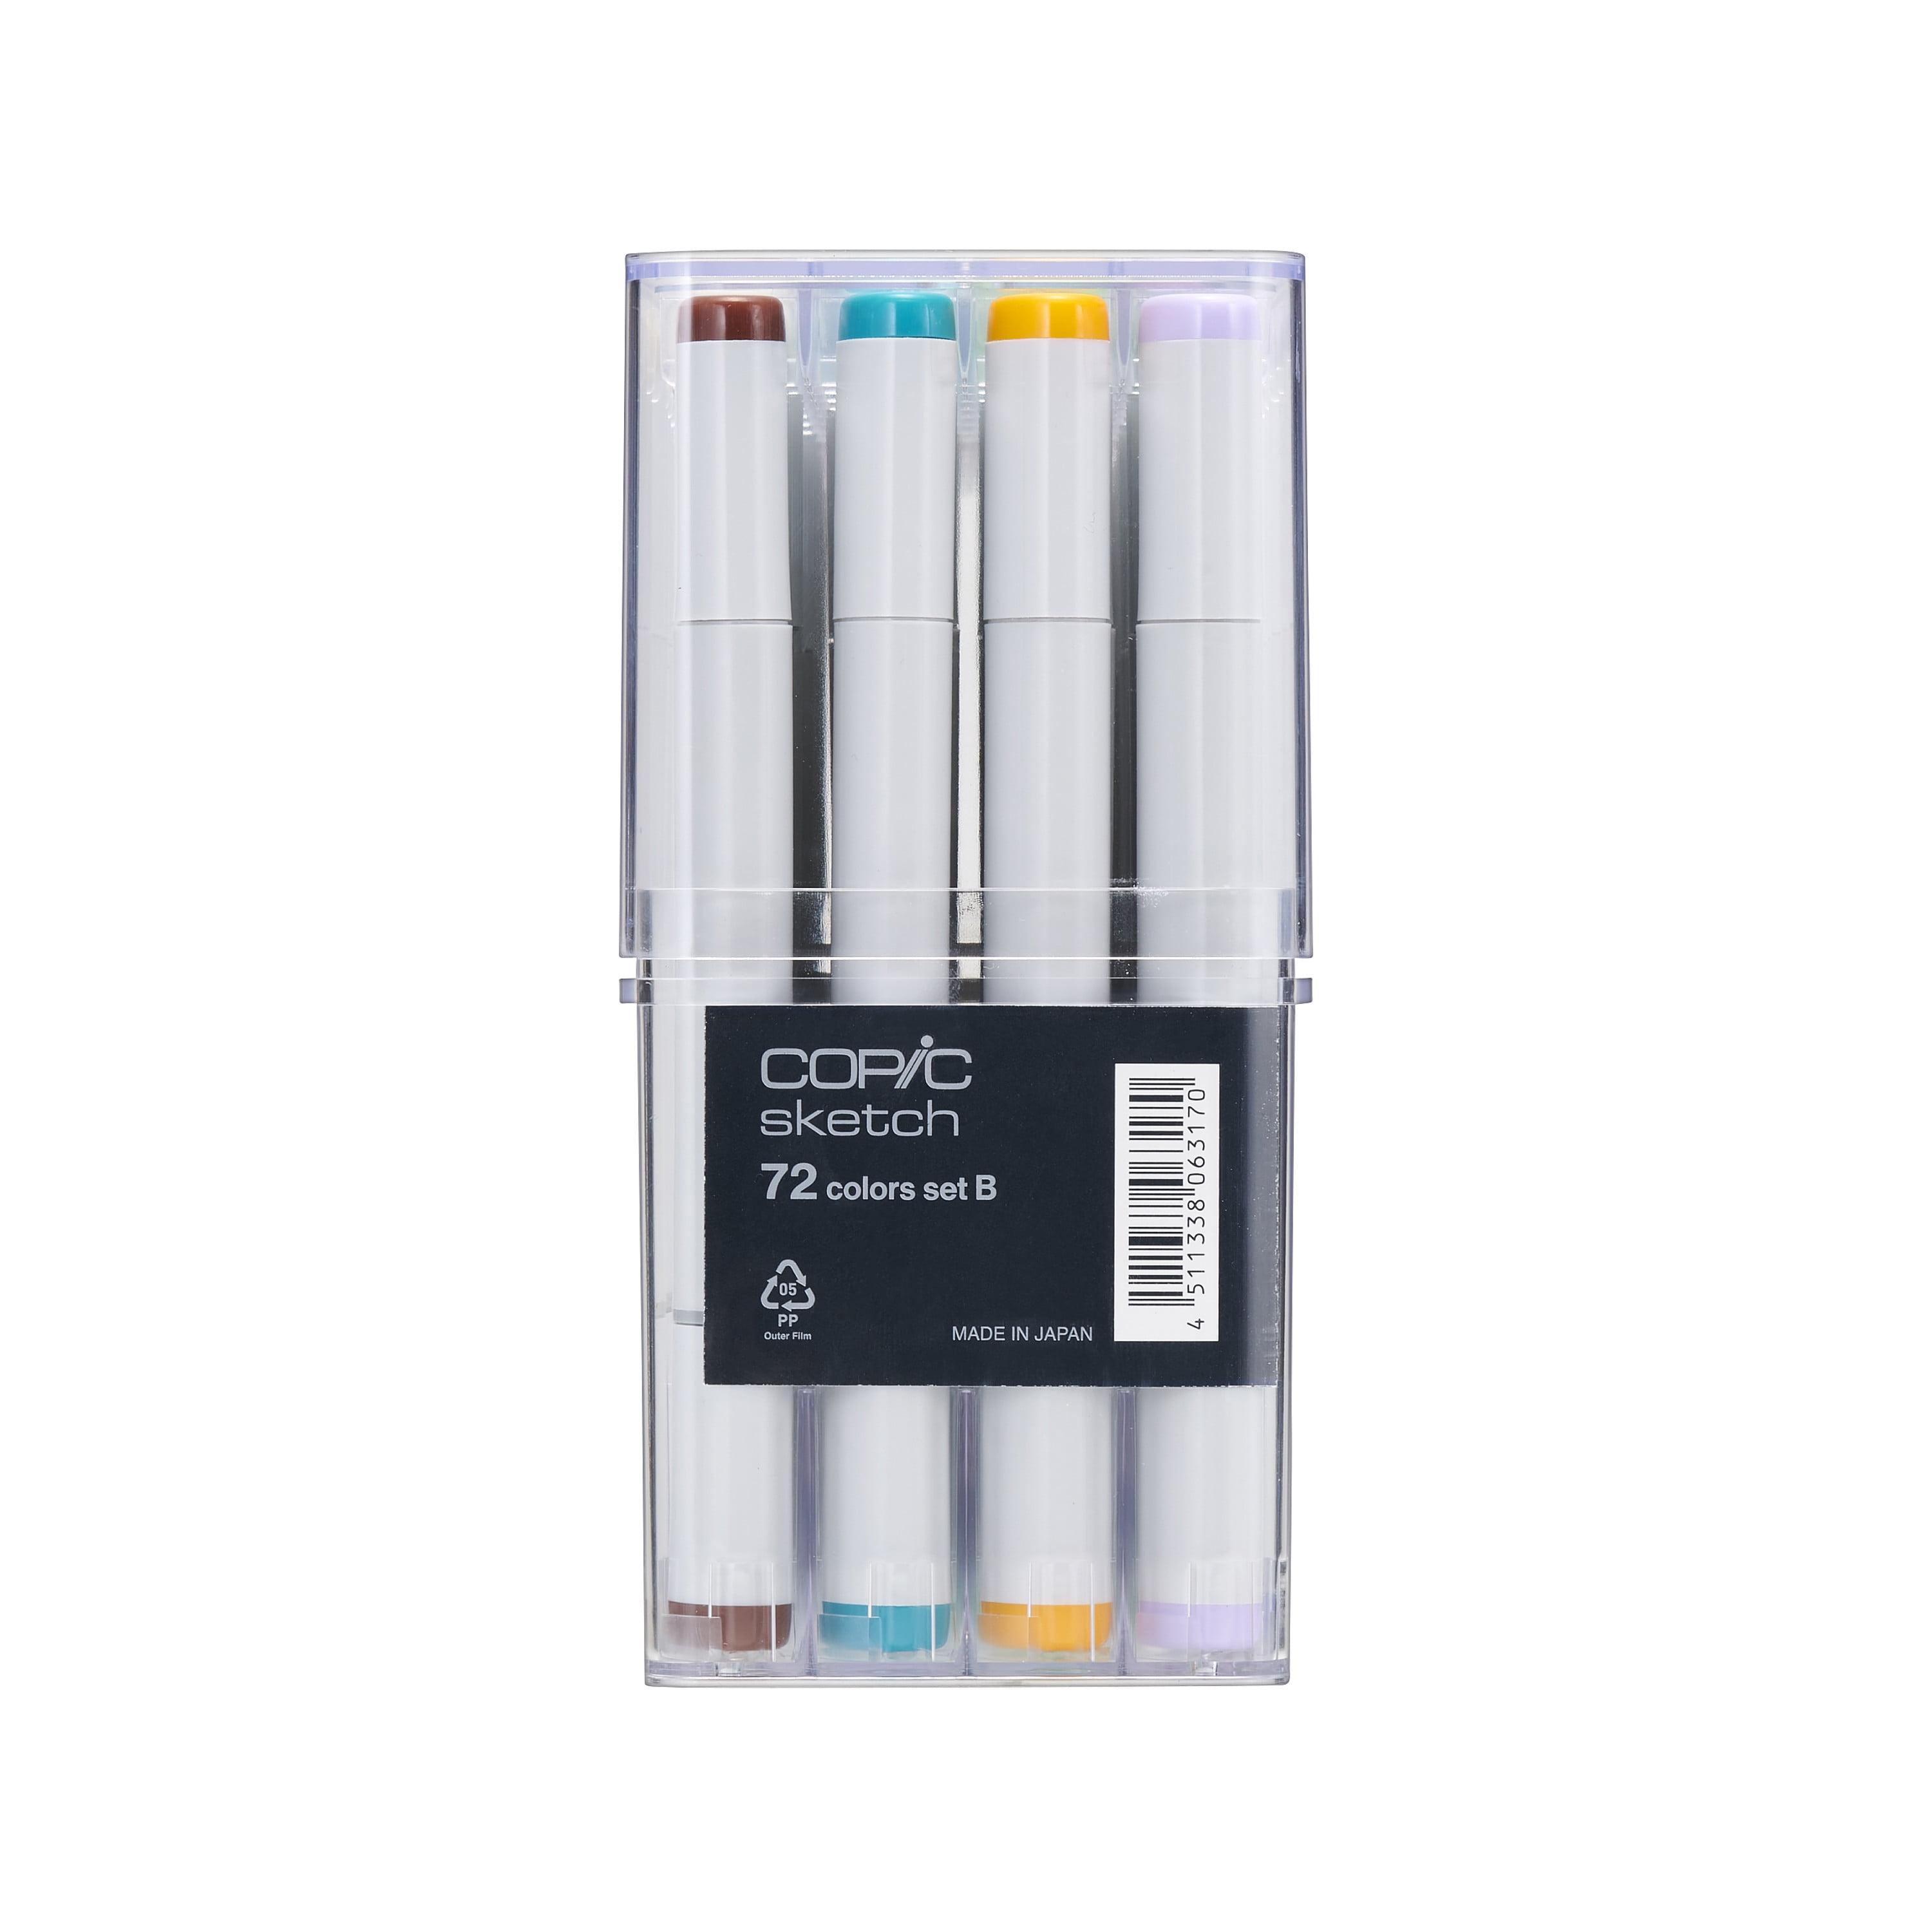 Copic Sketch Marker Set B 72 Colors , Premium Artist Markers ⭐Tracking⭐